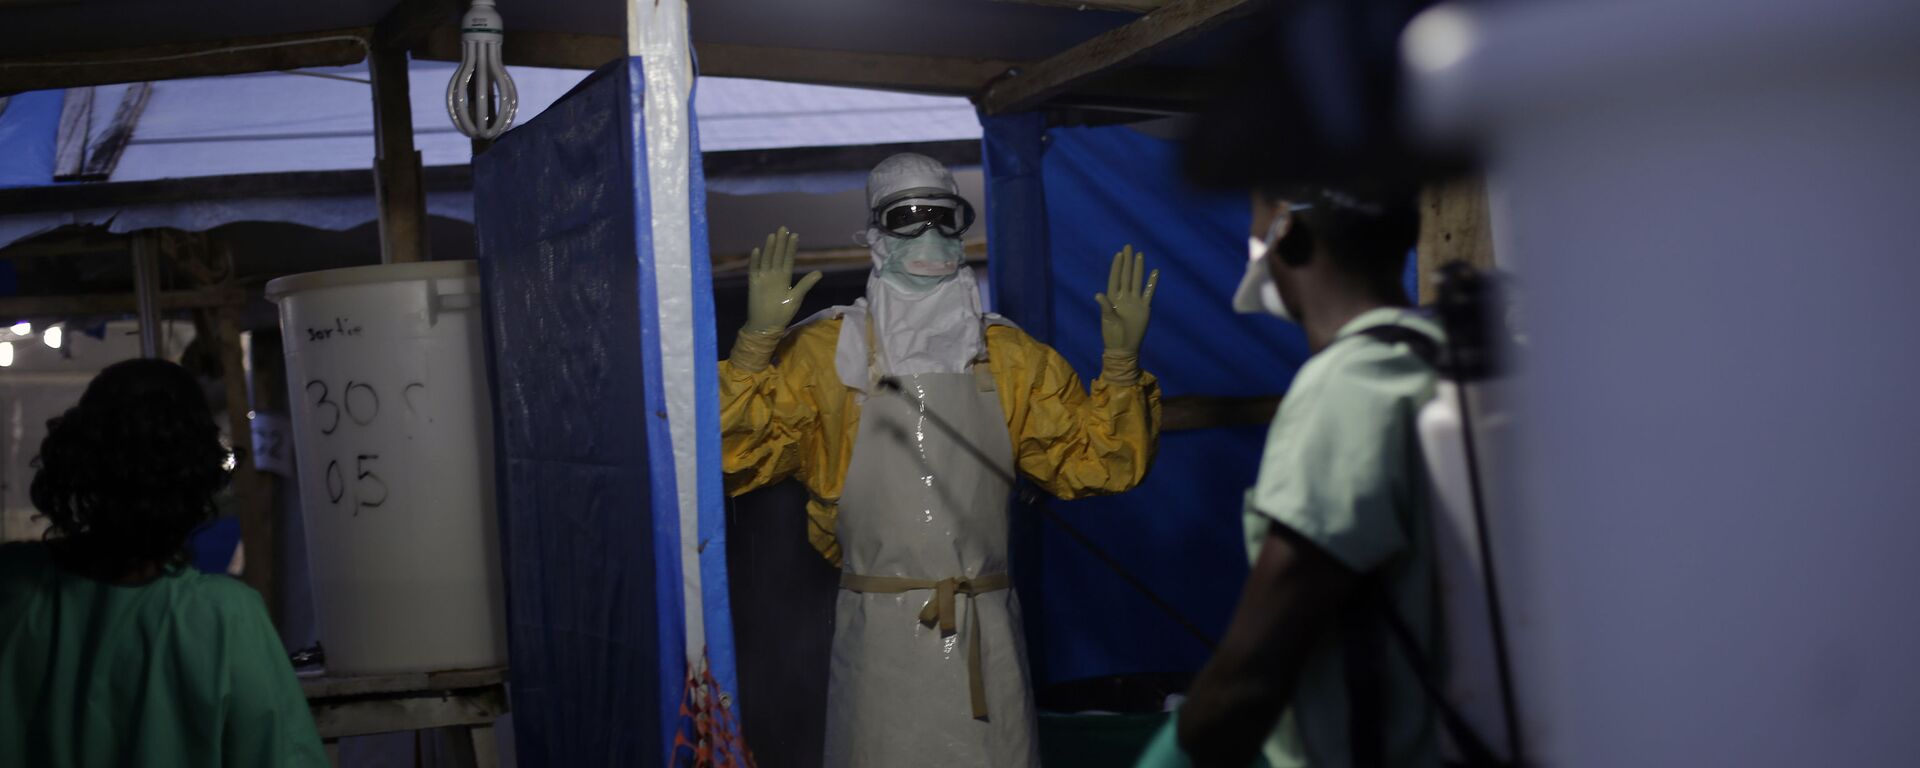 FILE- In this Nov. 20, 2014 file photo, an MSF Ebola heath worker is sprayed as he leaves the contaminated zone at the Ebola treatment centre in Gueckedou, Guinea - Sputnik International, 1920, 09.10.2021